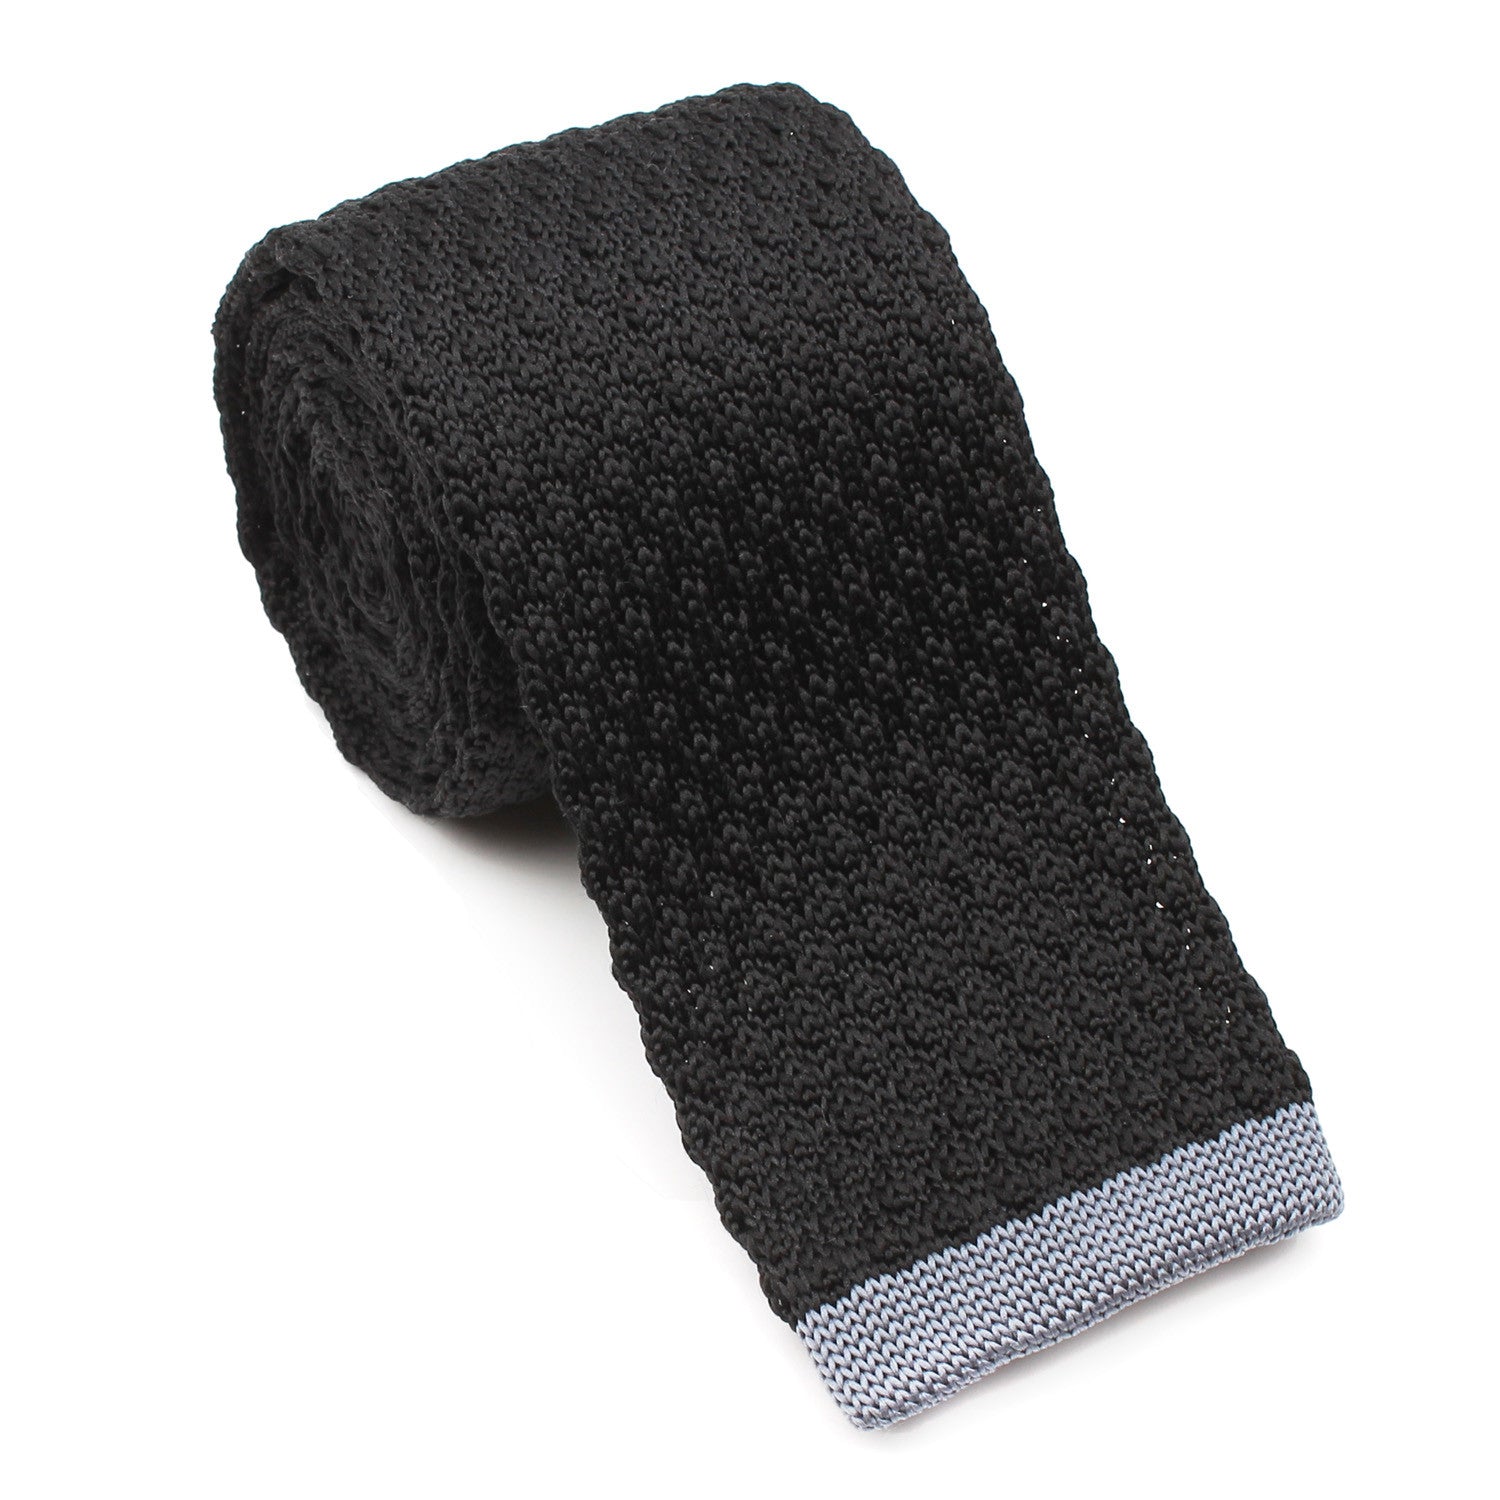 Black Knitted Tie with Grey Flat End OTAA